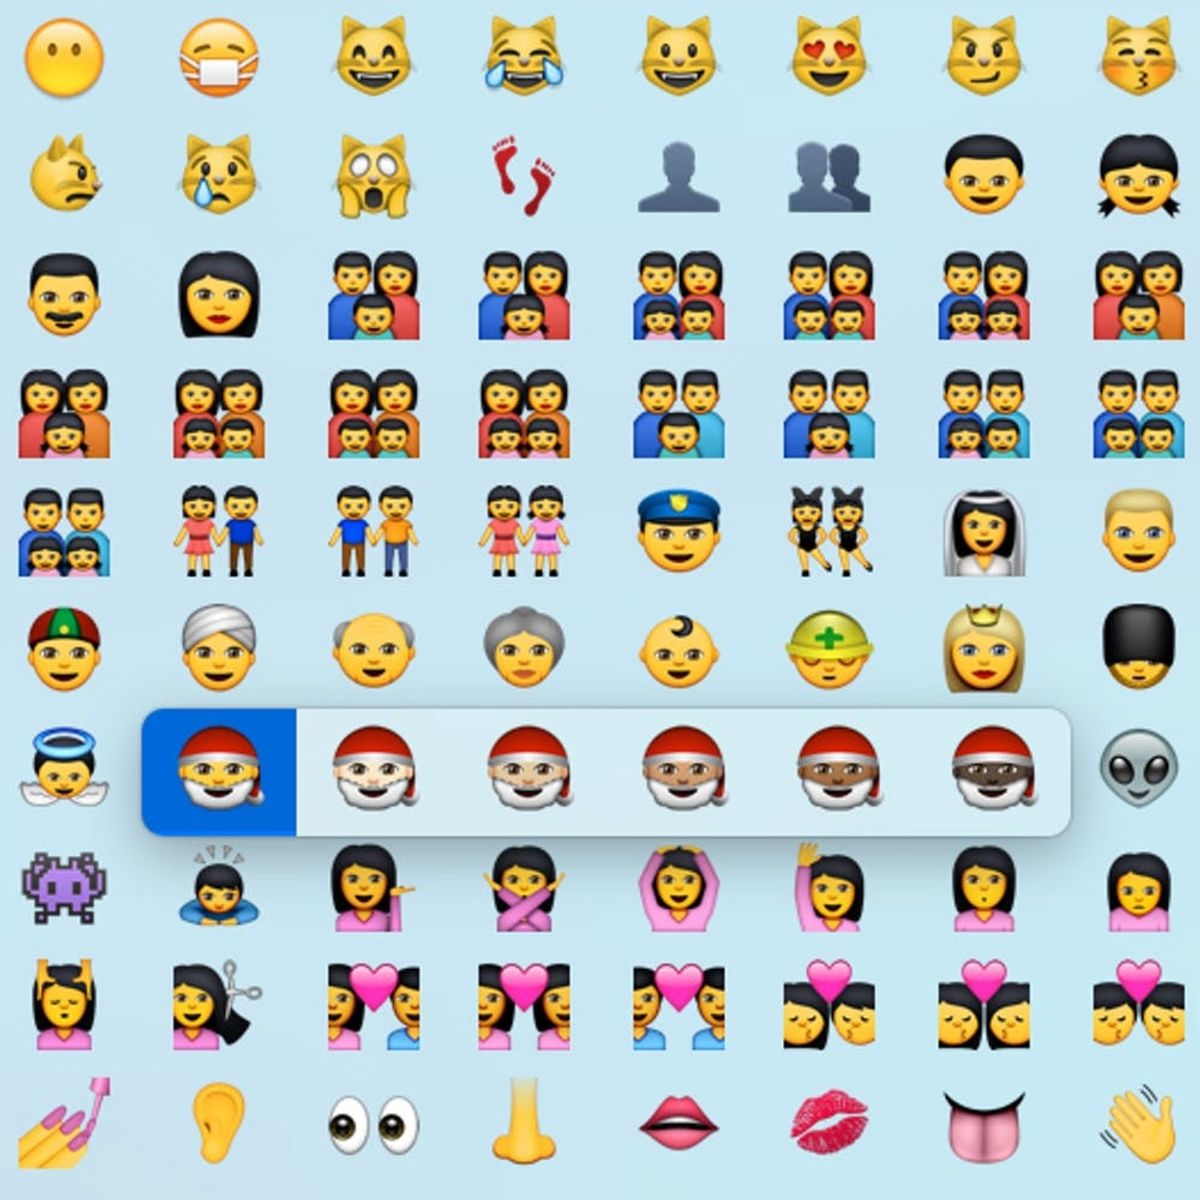 Preview the New (Diverse!) Emoji Coming to Your Phone